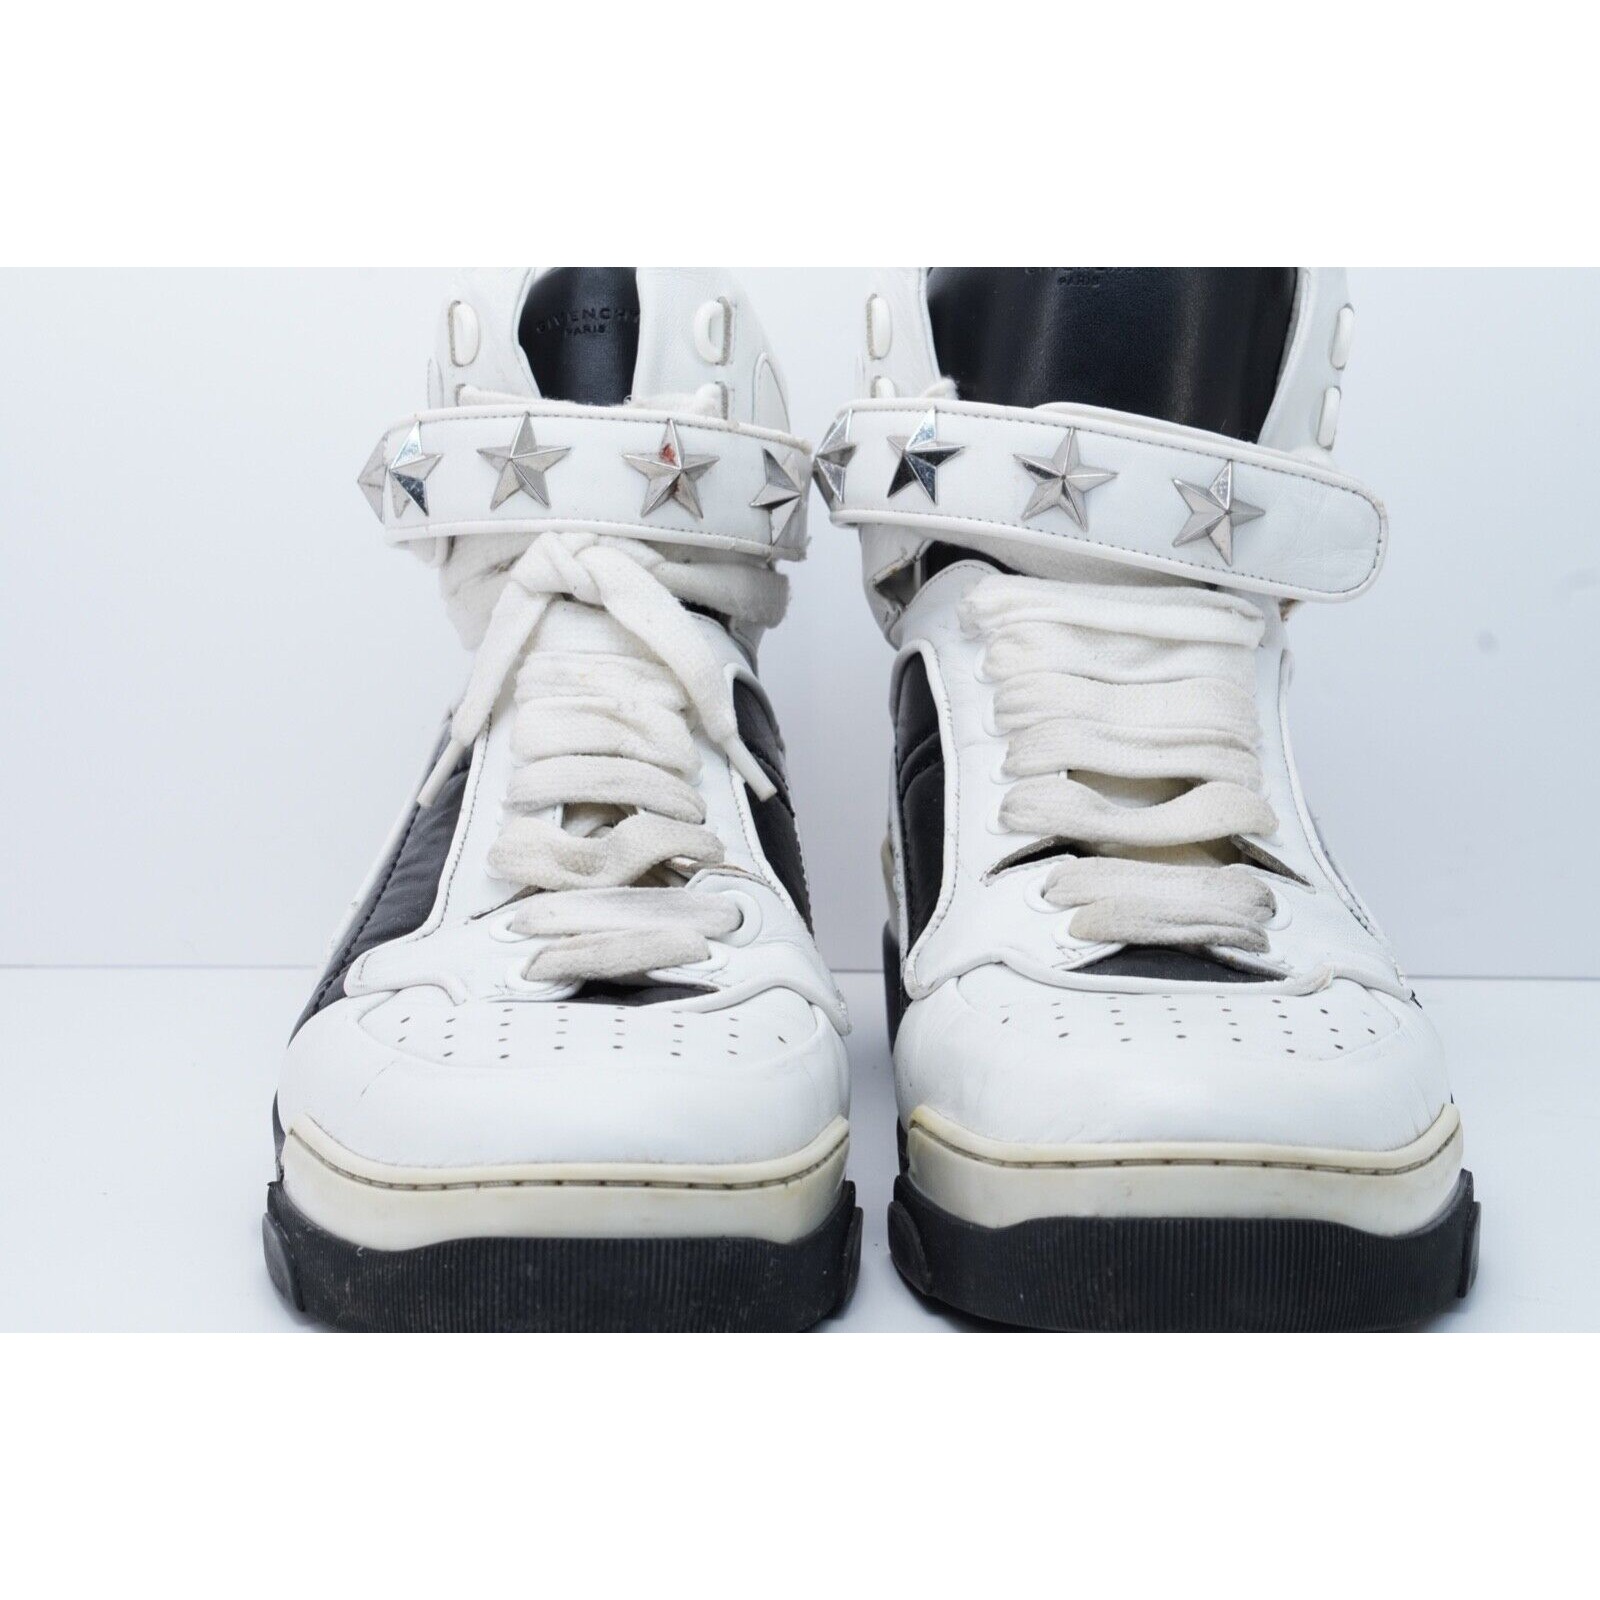 Givenchy Tyson Star Sneakers Shoes White Leather High Top 44 - 5